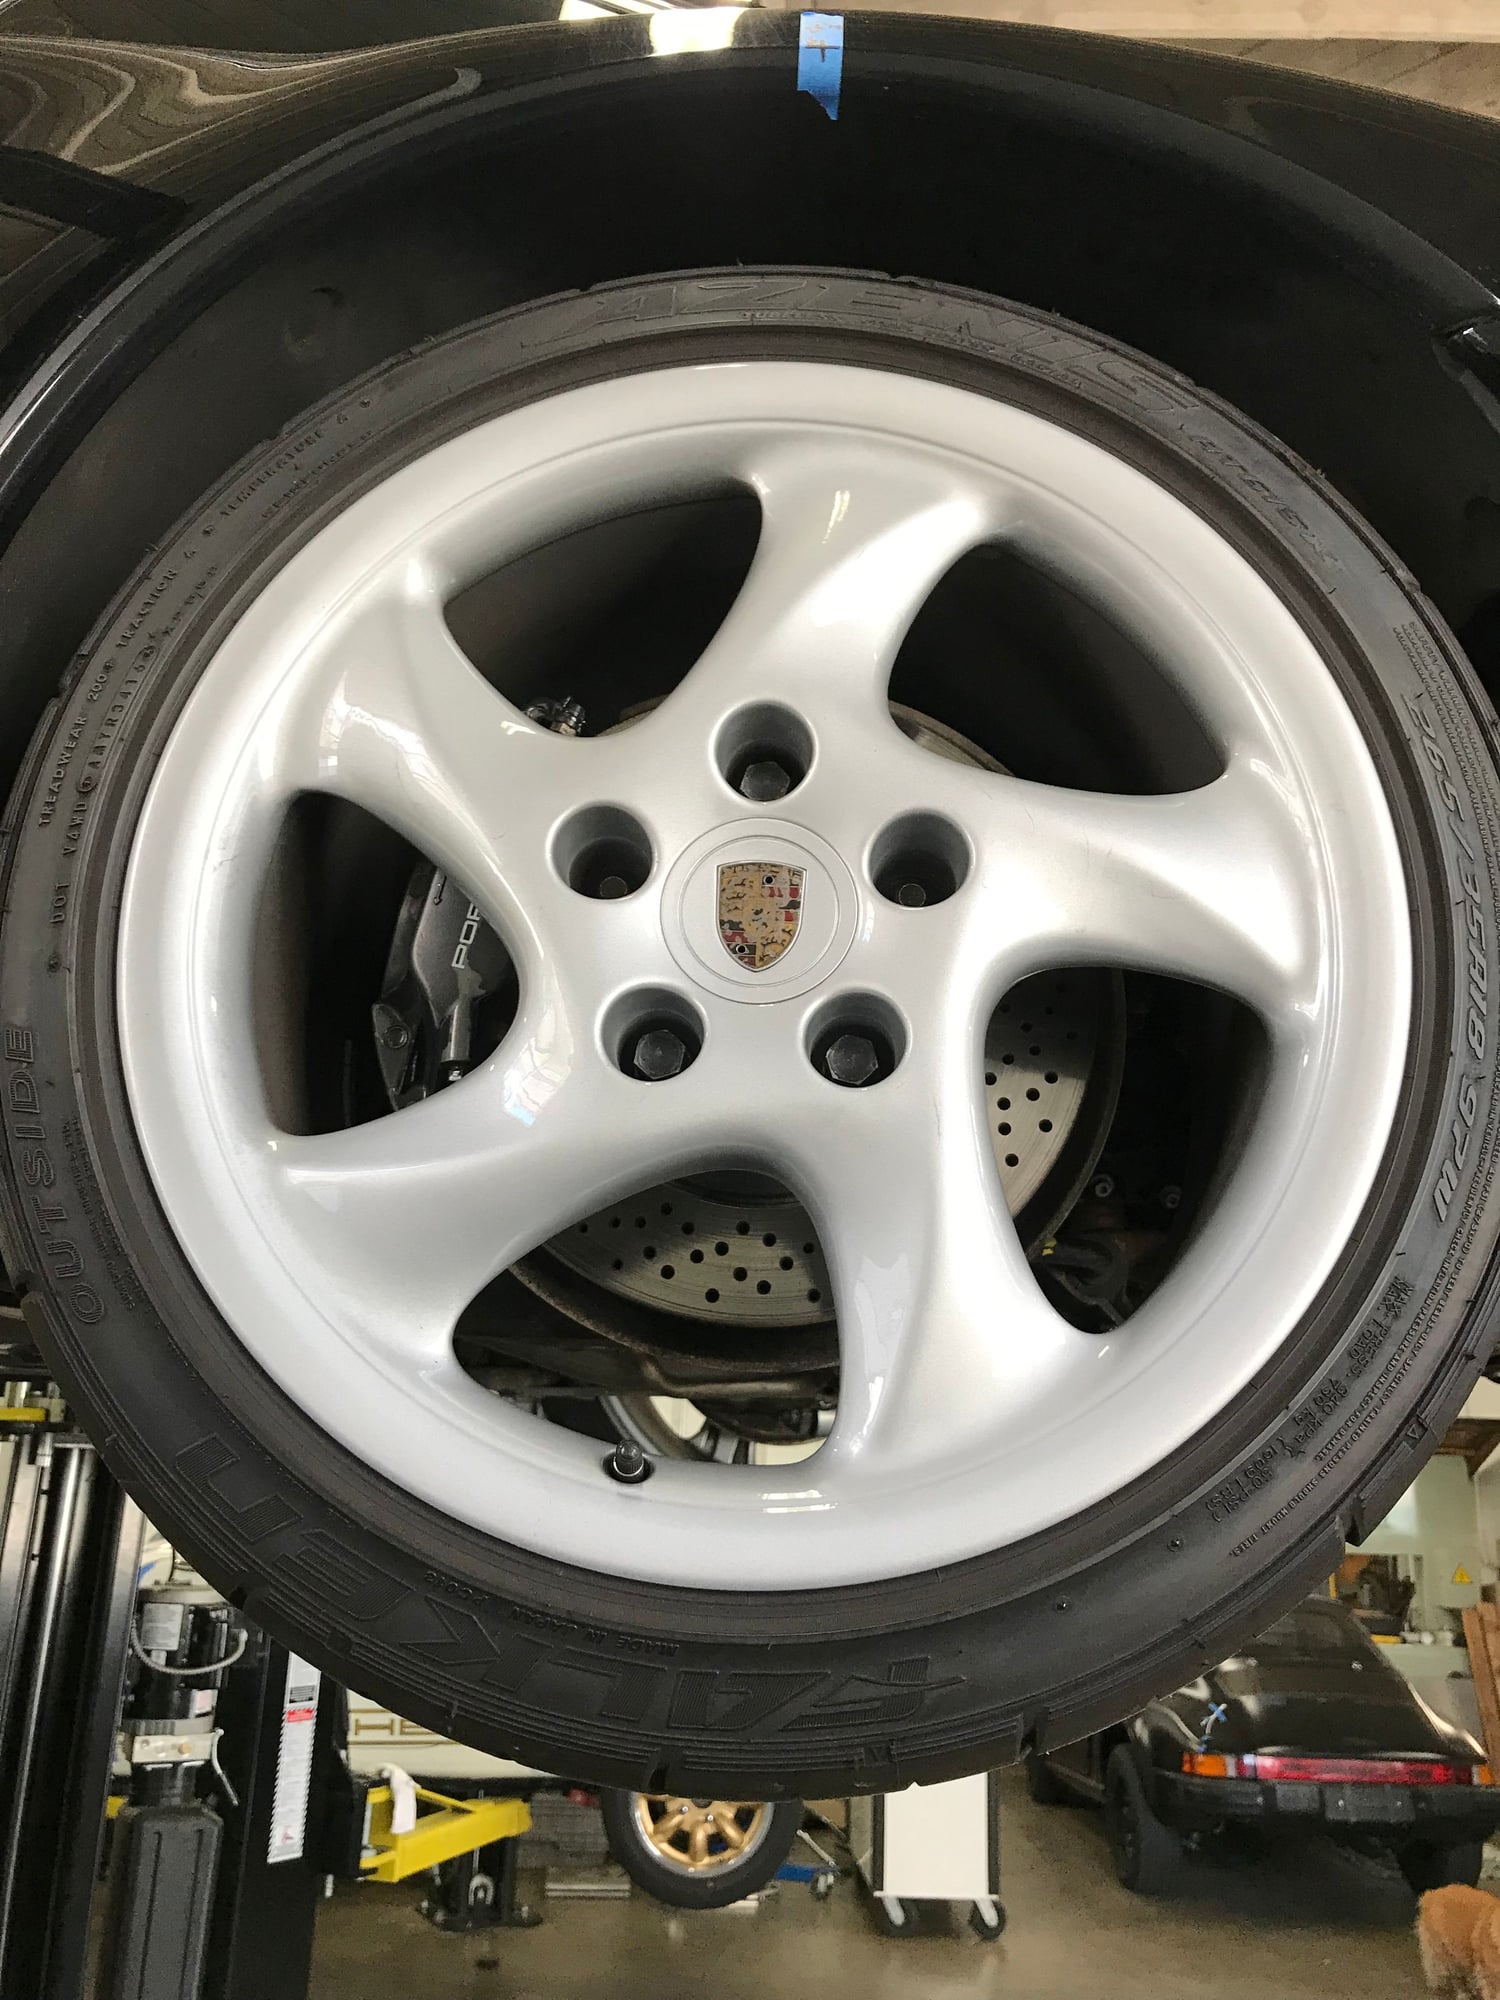 Wheels and Tires/Axles - FS: 18inch turbo twists. - Used - 1989 to 2004 Porsche 911 - Redlands, CA 92373, United States